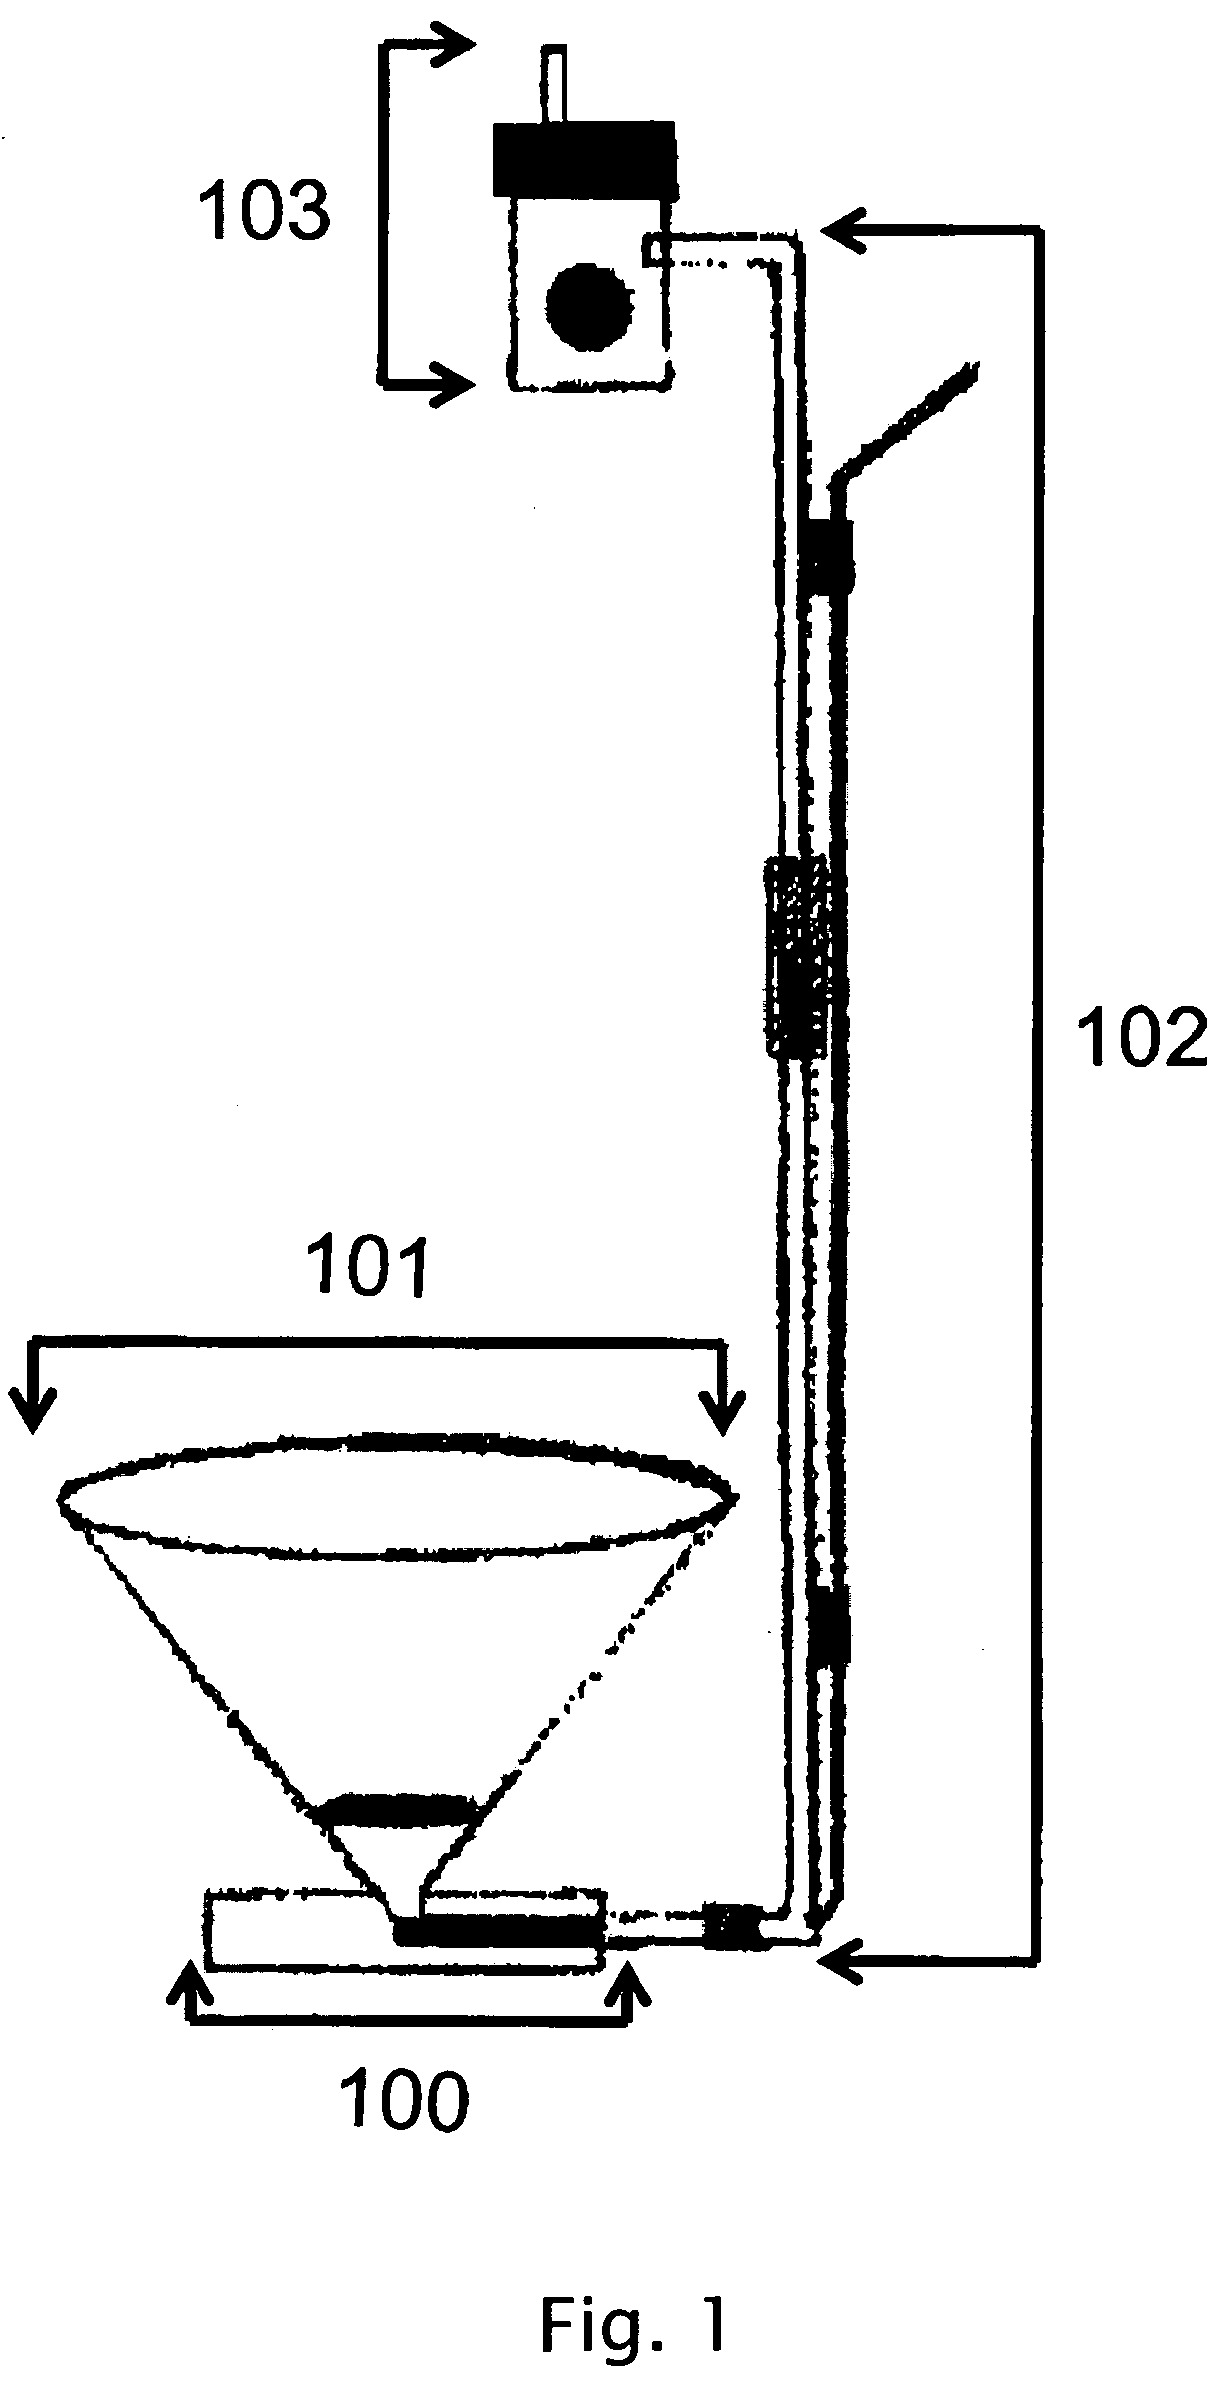 Aquatic animal egg collection apparatus, and method of use